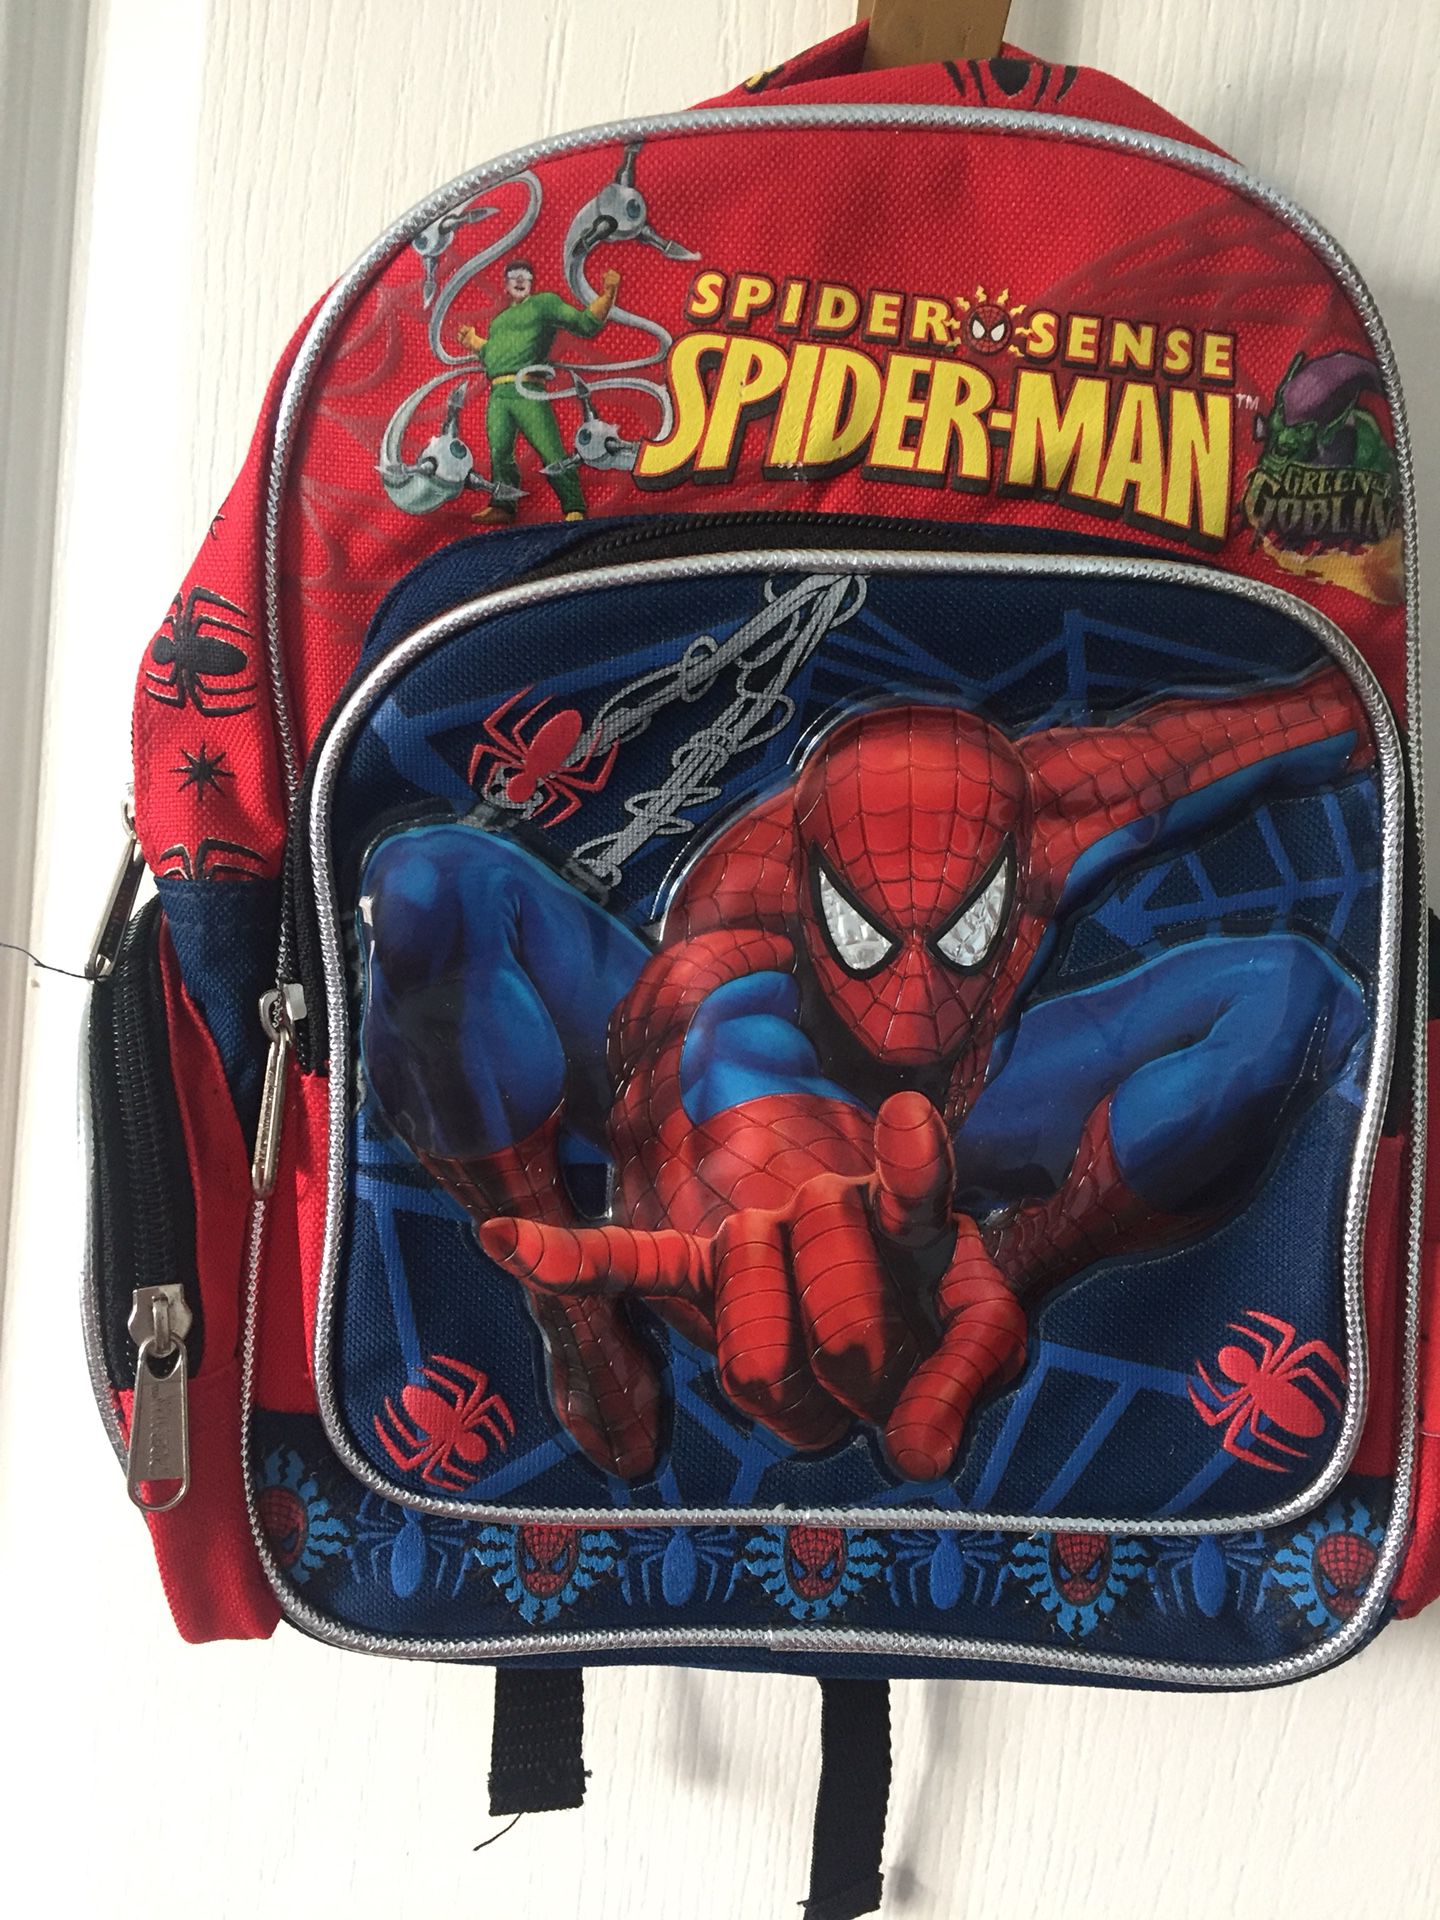 Shark X Spiderman Backpack for Sale in Tempe, AZ - OfferUp